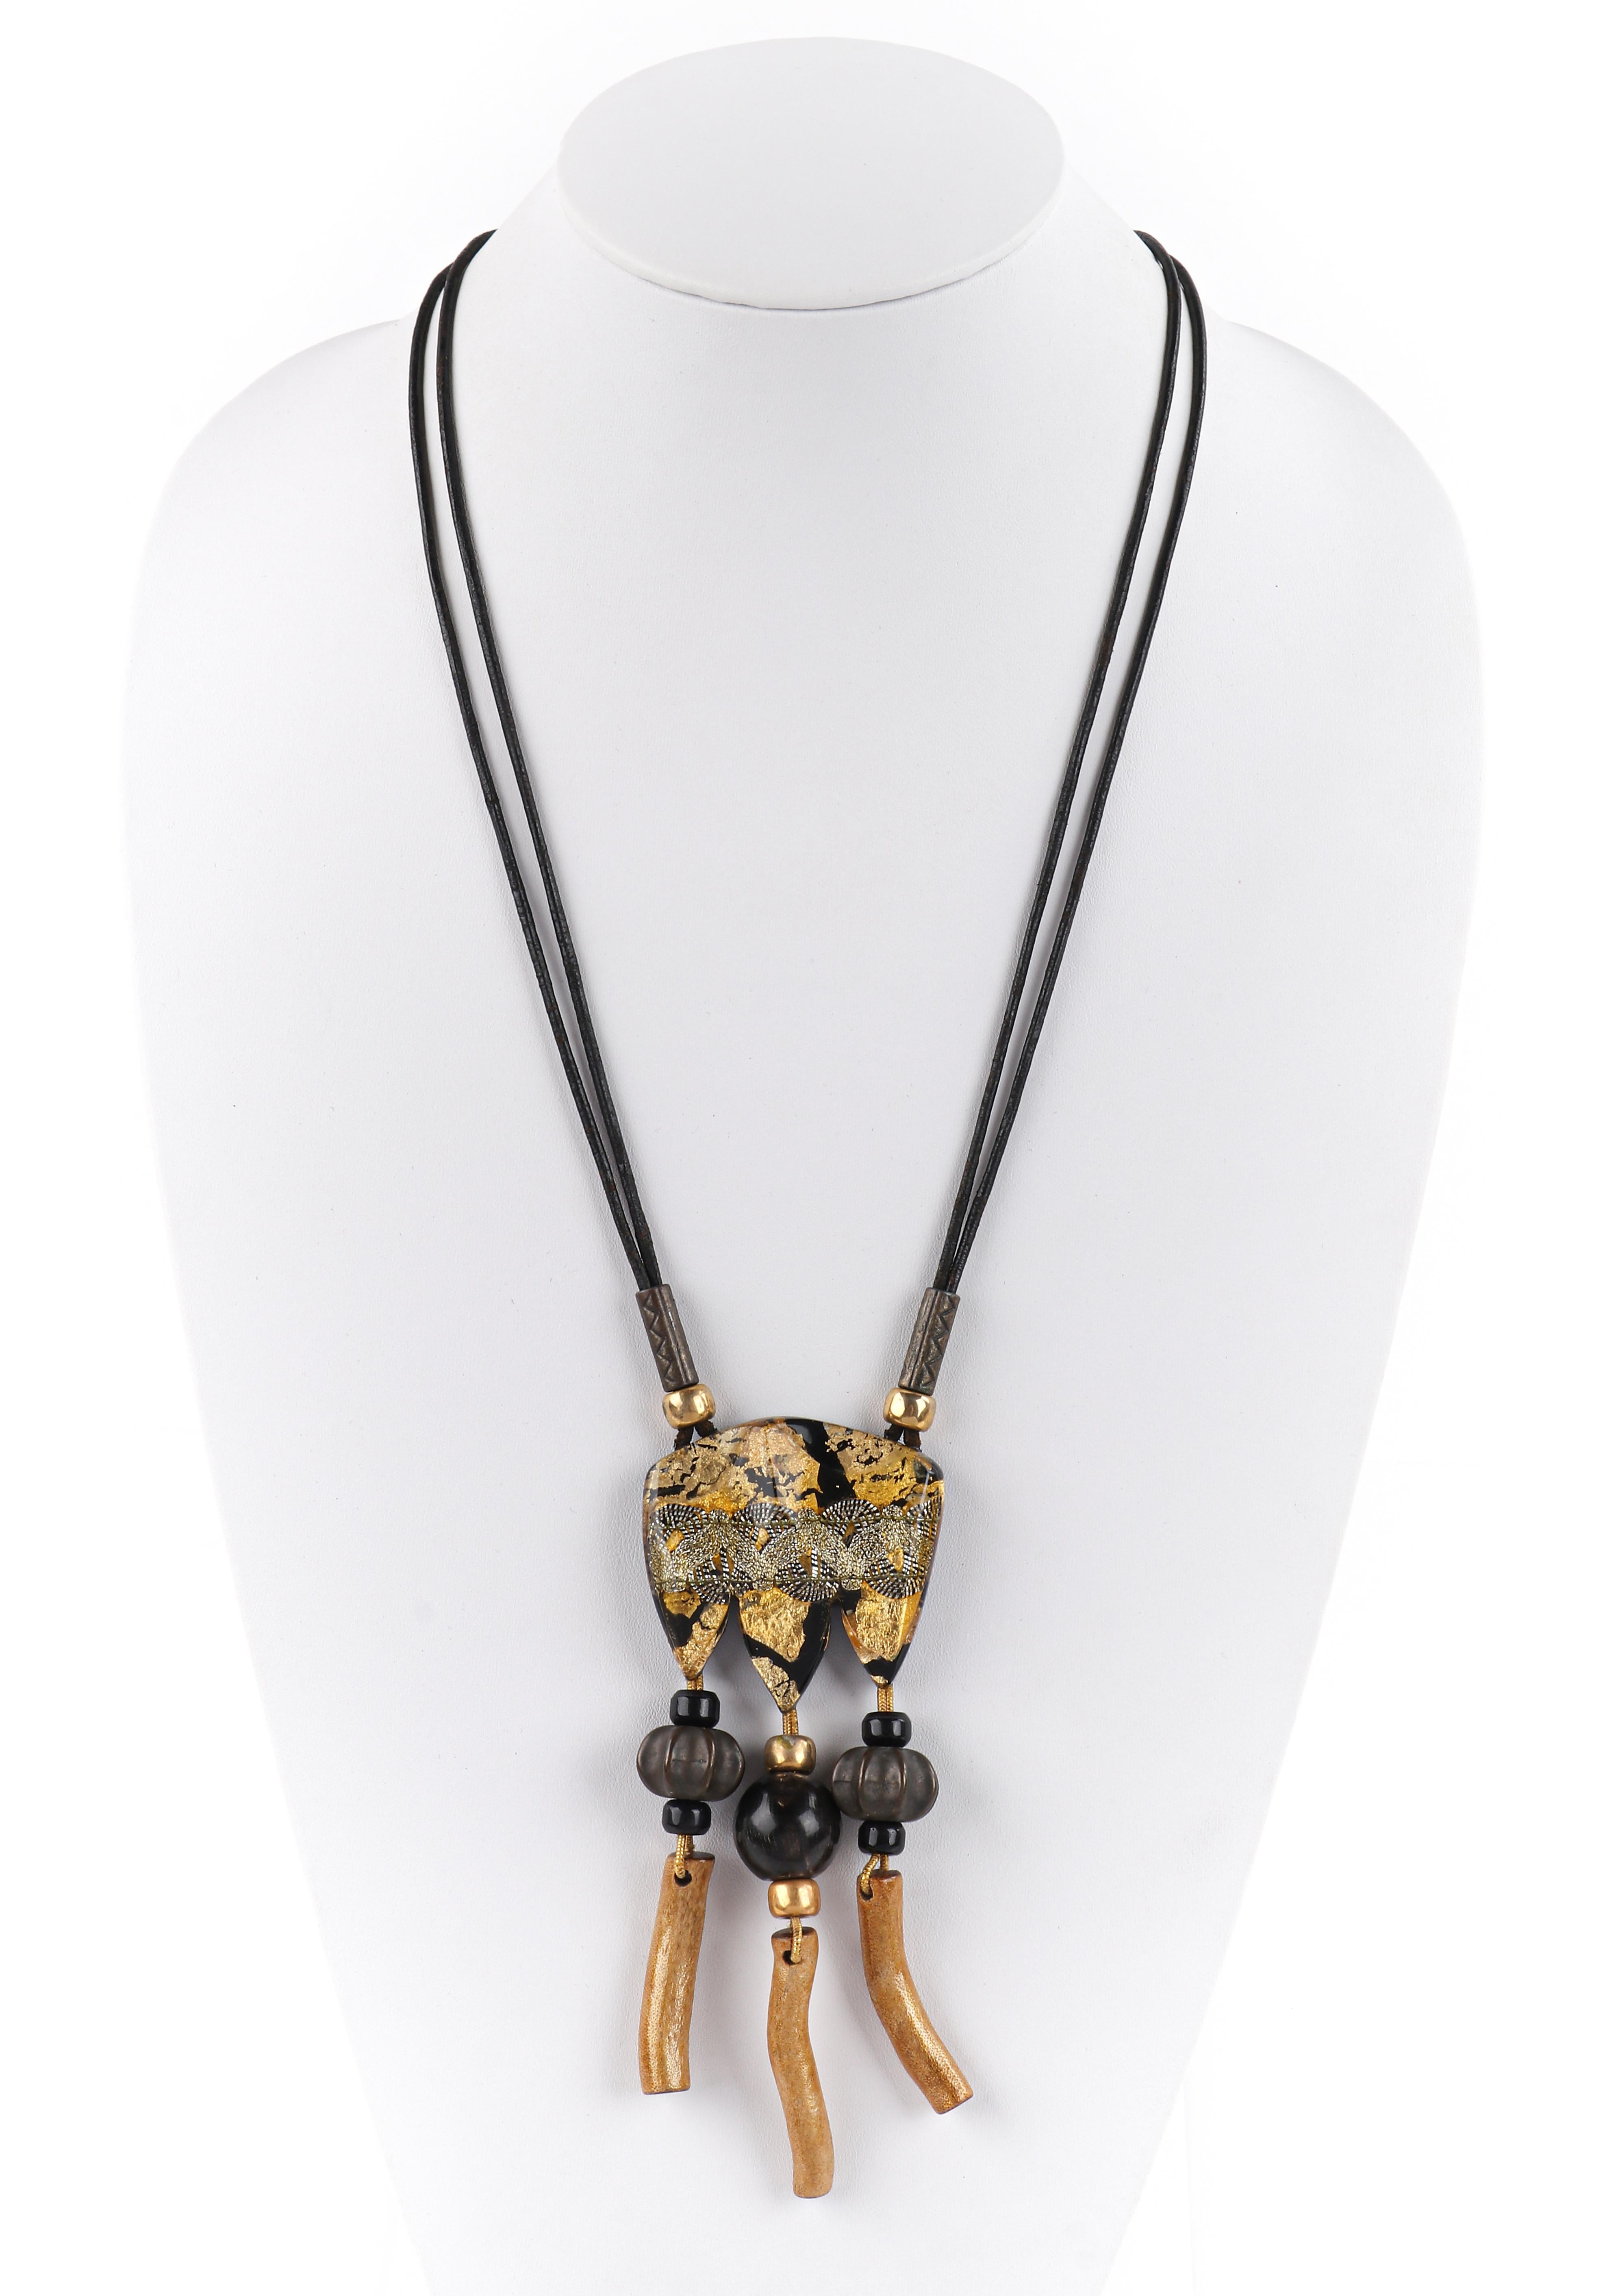 ANNE & FRANK VIGNERI Black Gold Metallic Beaded Lucite Art Pendant Cord Necklace
 
Brand / Manufacturer: Vigneri
Circa: 1980s-1990s
Style: Pendant necklace
Color(s): Shades of black, gold, brown, silver
Unmarked Material (feel of): Pendant: Lucite;